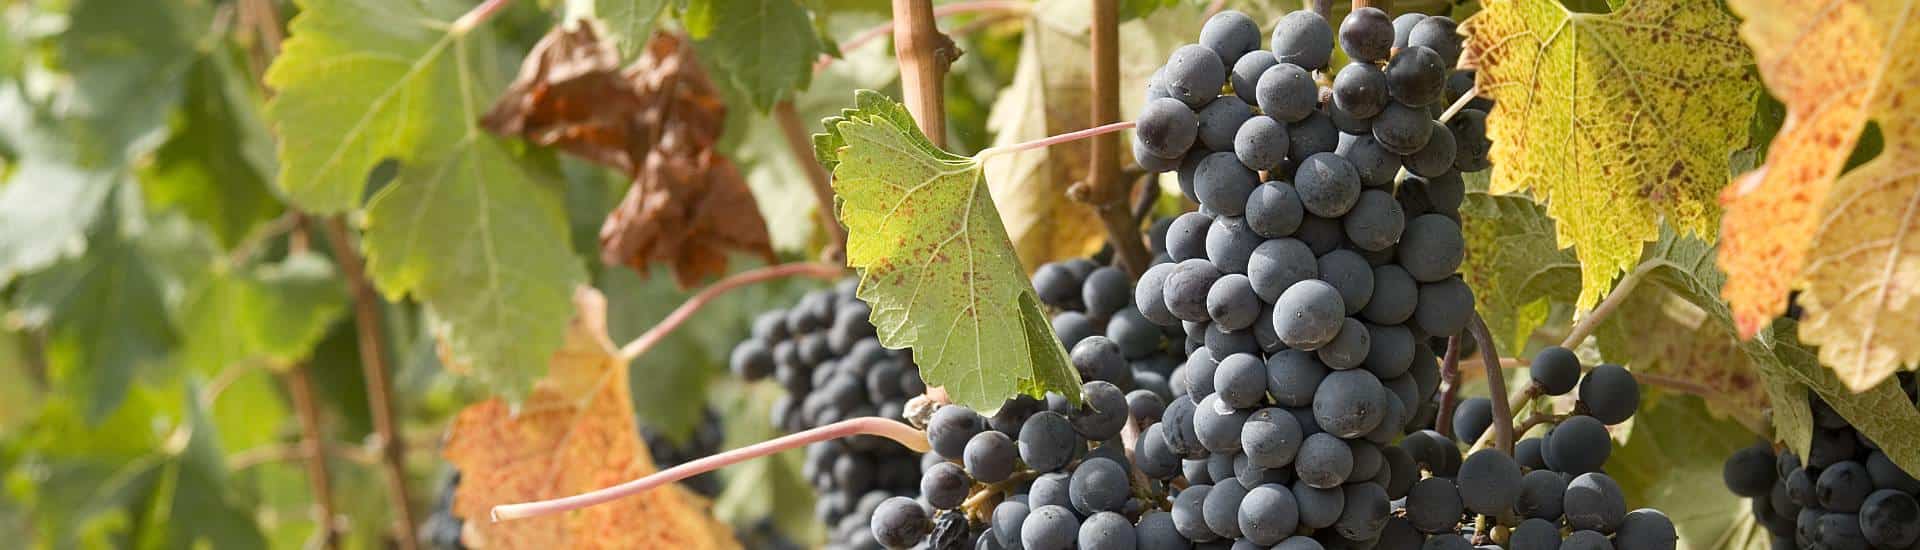 Close up view of purple grapes on a vine surrounded by green and orange leaves